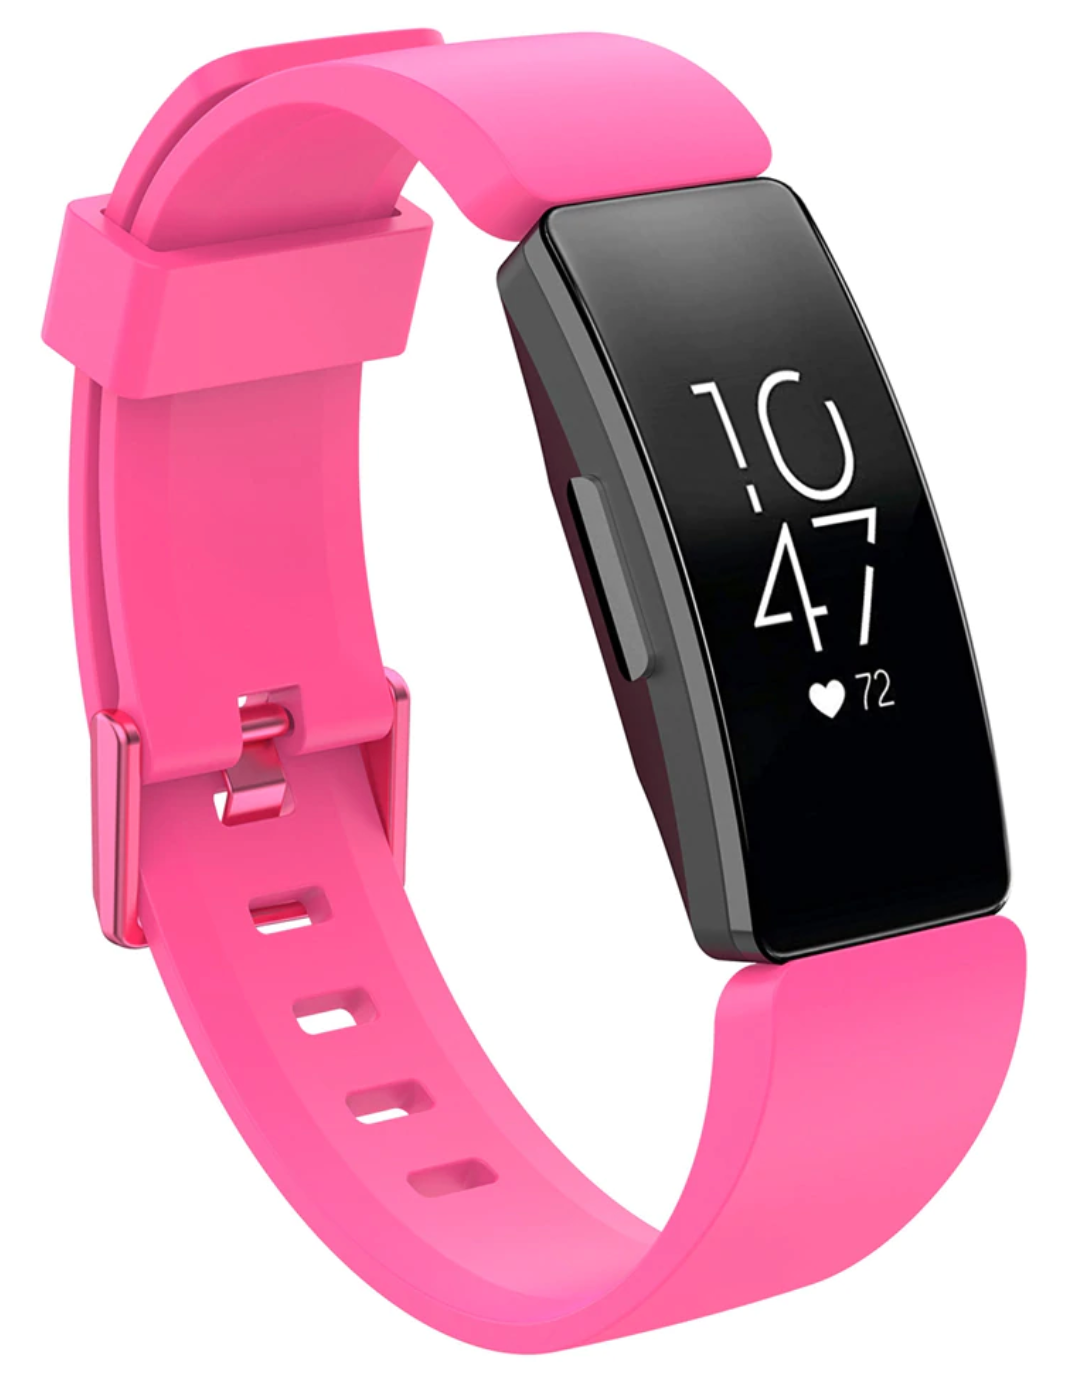 Fitbit Inspire HR Band Fitbit Inspire 2 Bands for Women Fitbit 